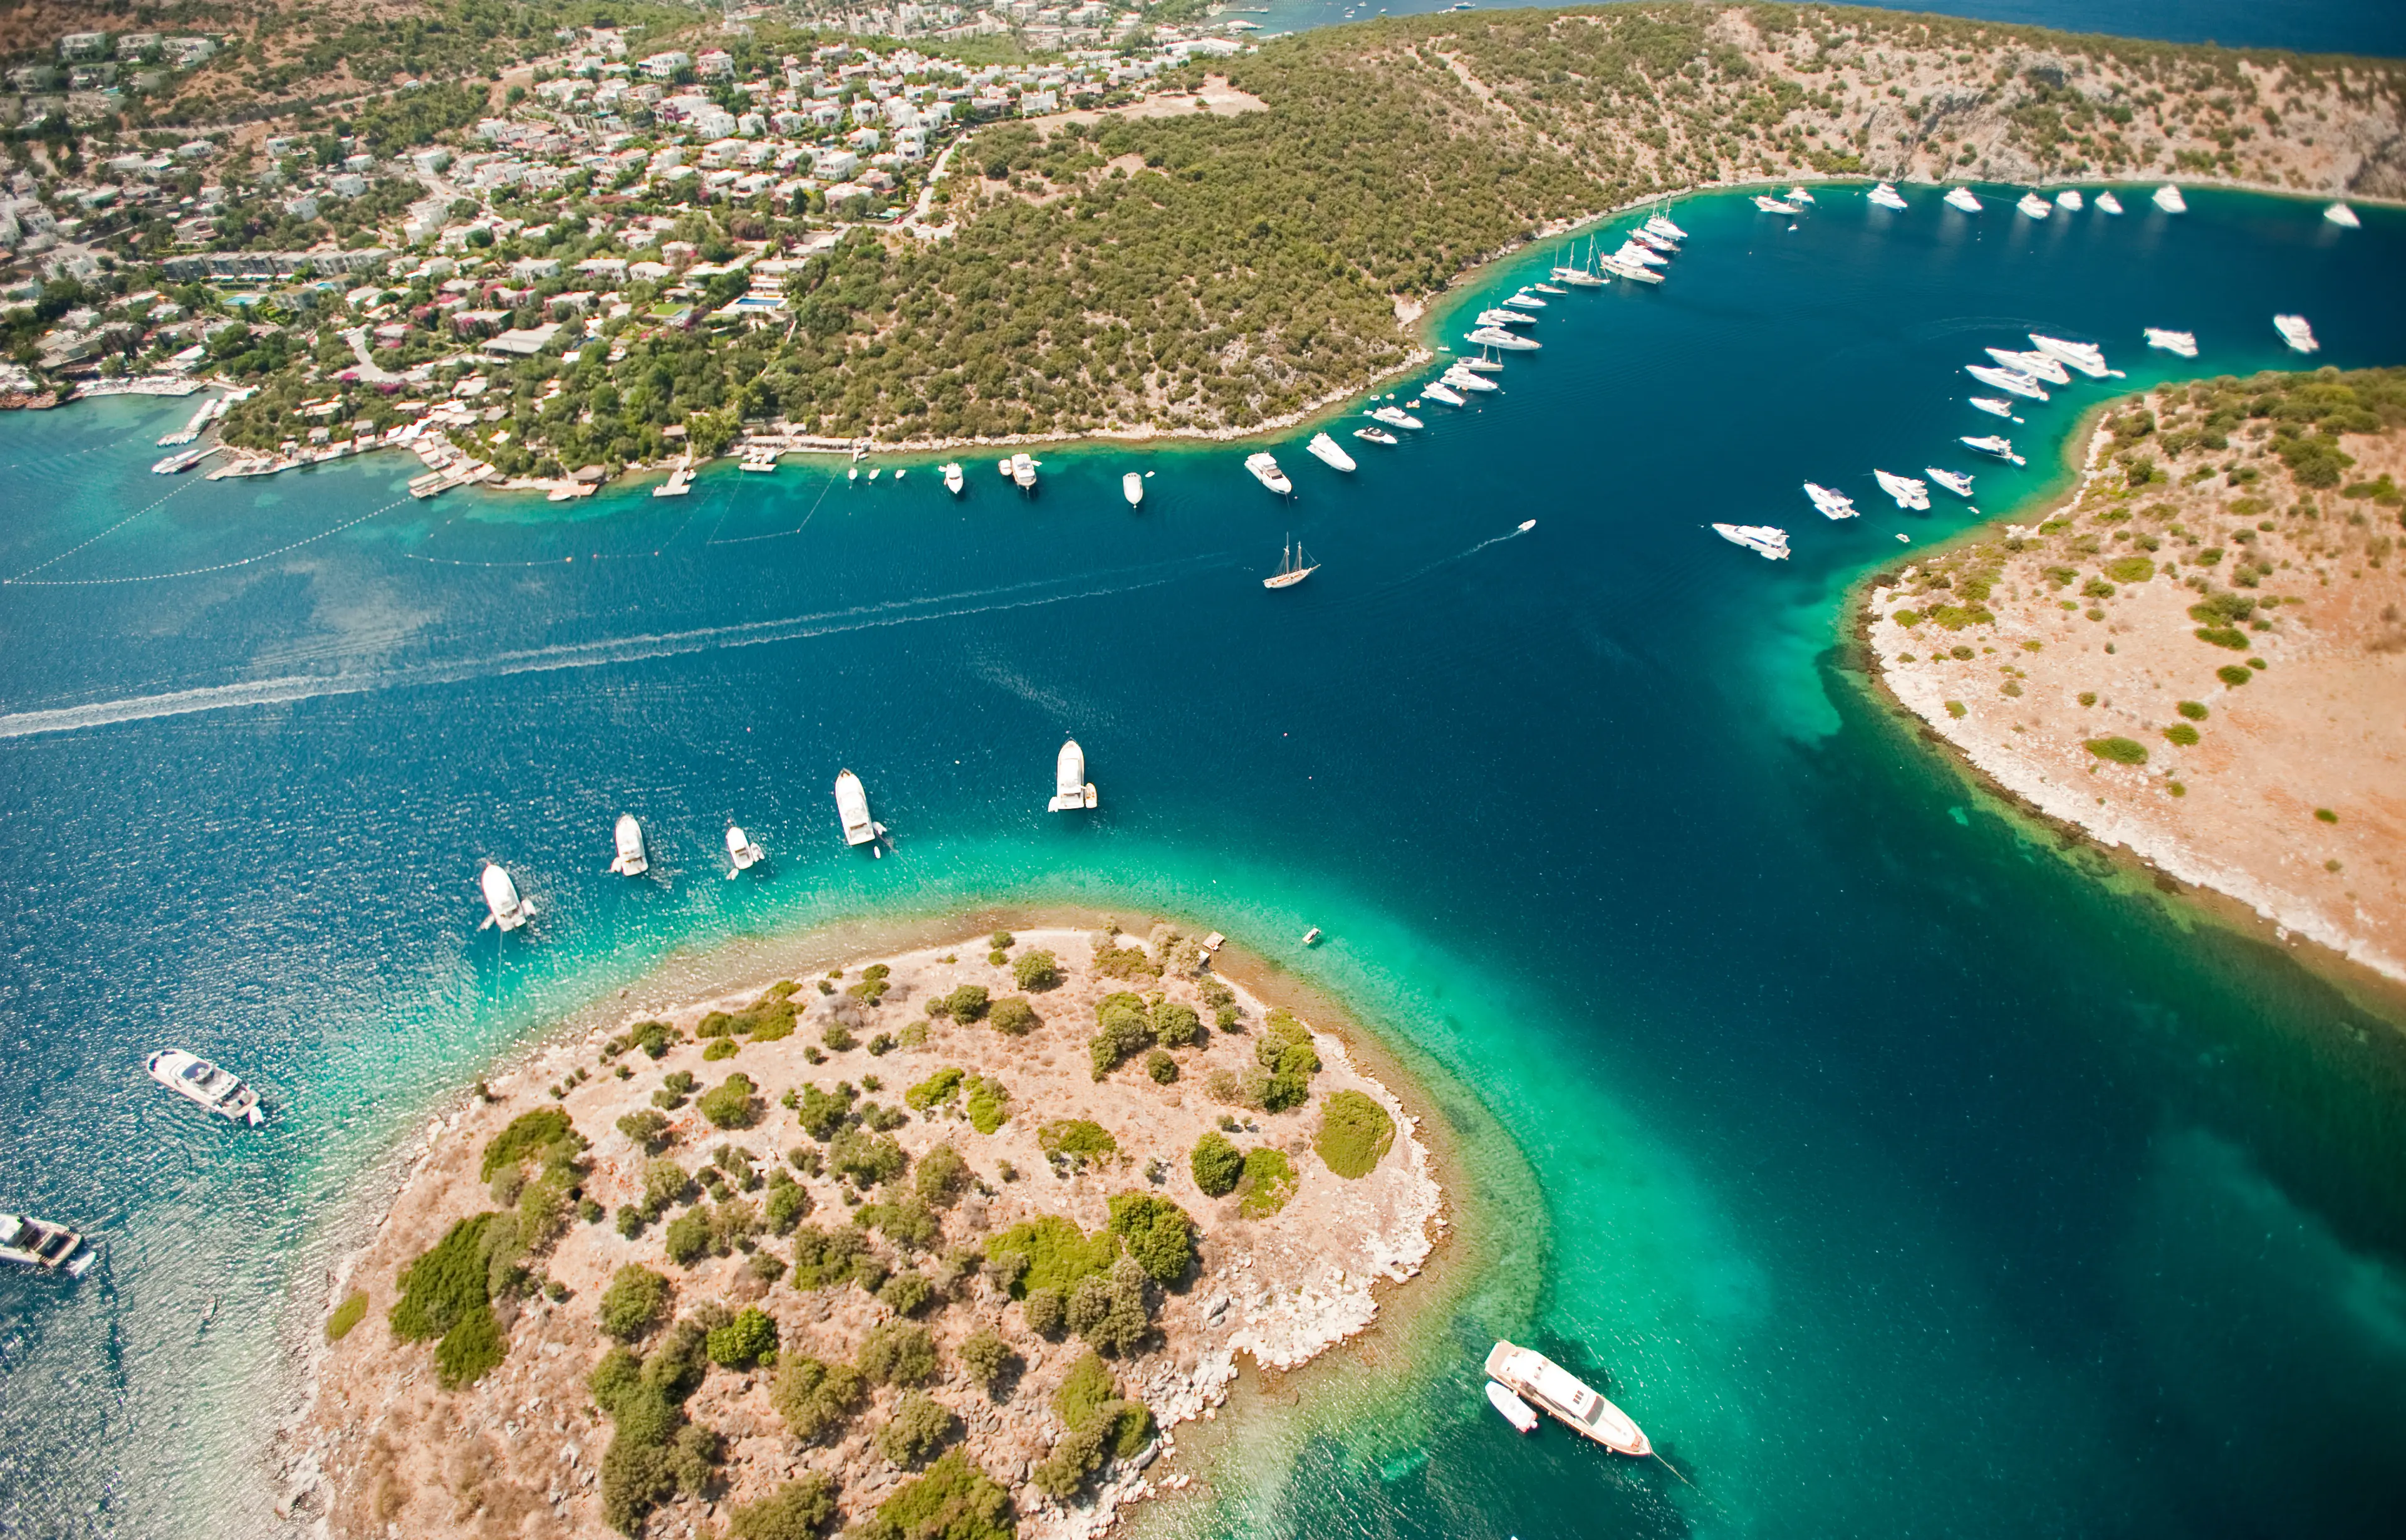 4-Day Exquisite Tour Itinerary in Bodrum, Turkey